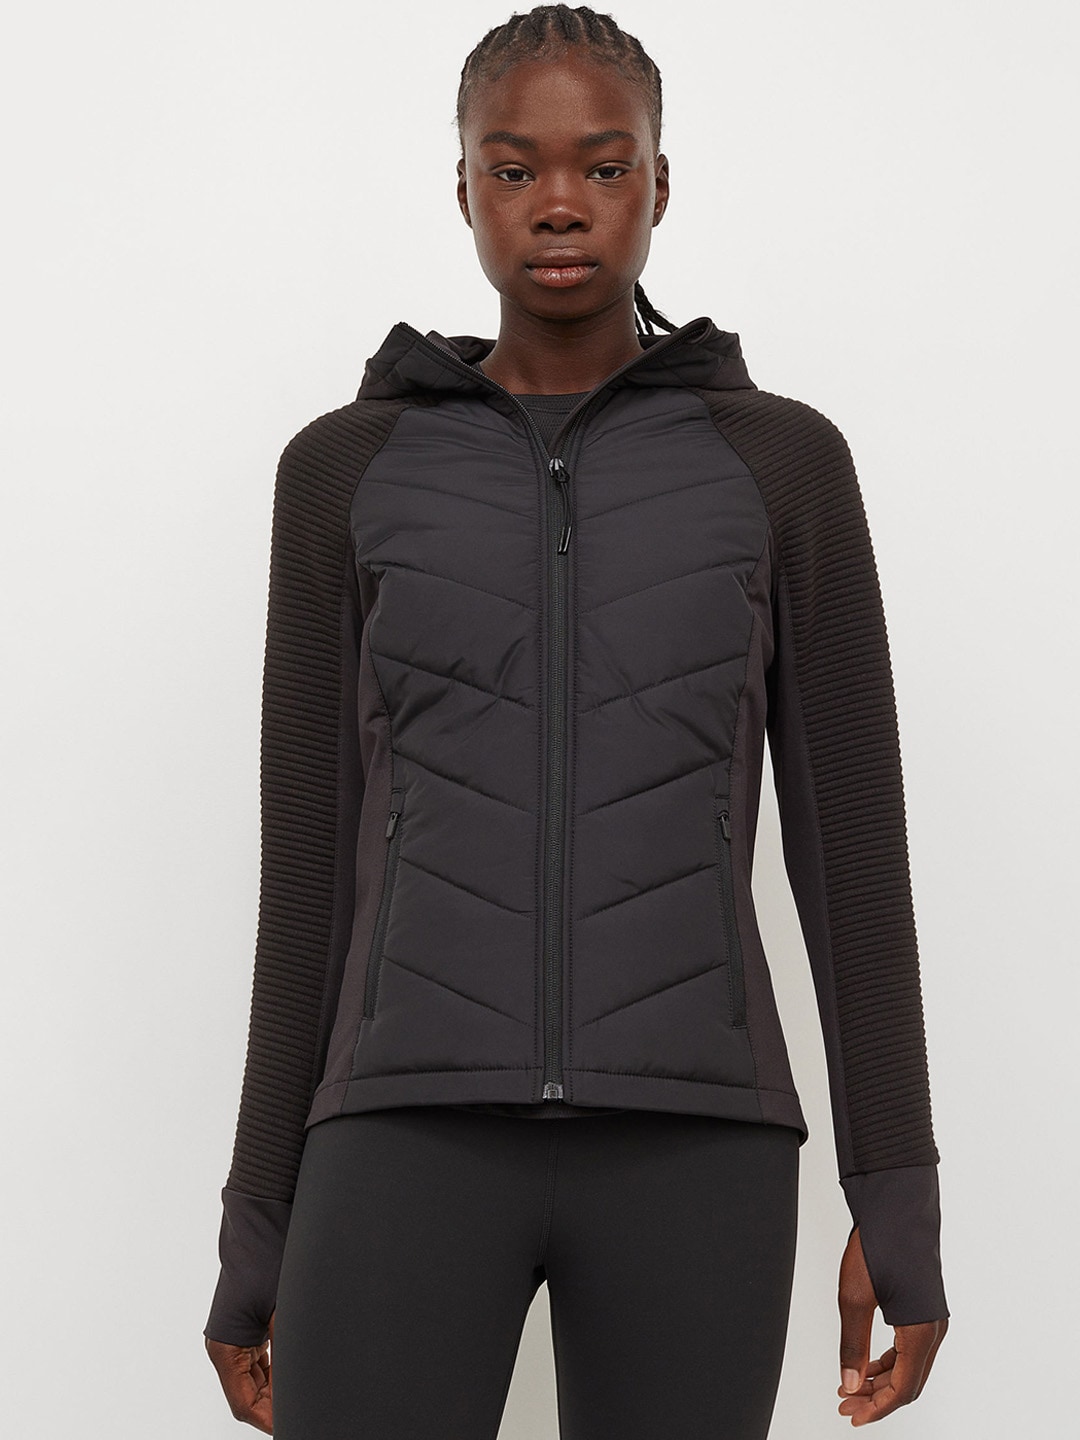 H&M Women Black Padded Hooded Outdoor Jacket Price in India